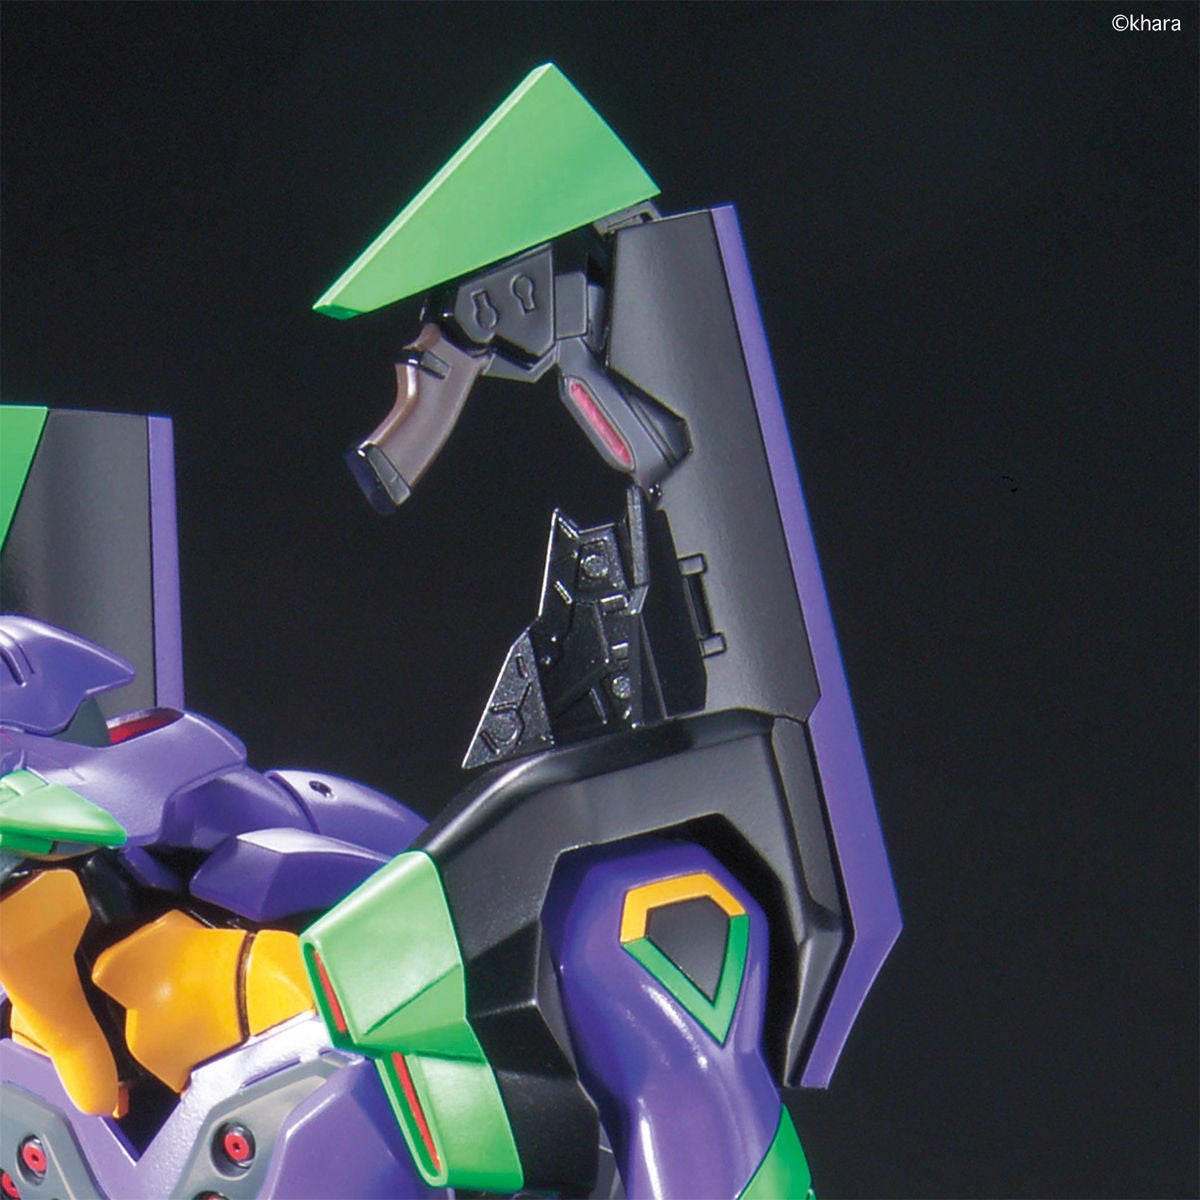 Evangelion - Unit-01 - LMHG New Theatrical Edition Model Kit, includes 2 progressive knives, 1 palette rifle, and 1 umbilical cable, sold by Nippon Figures